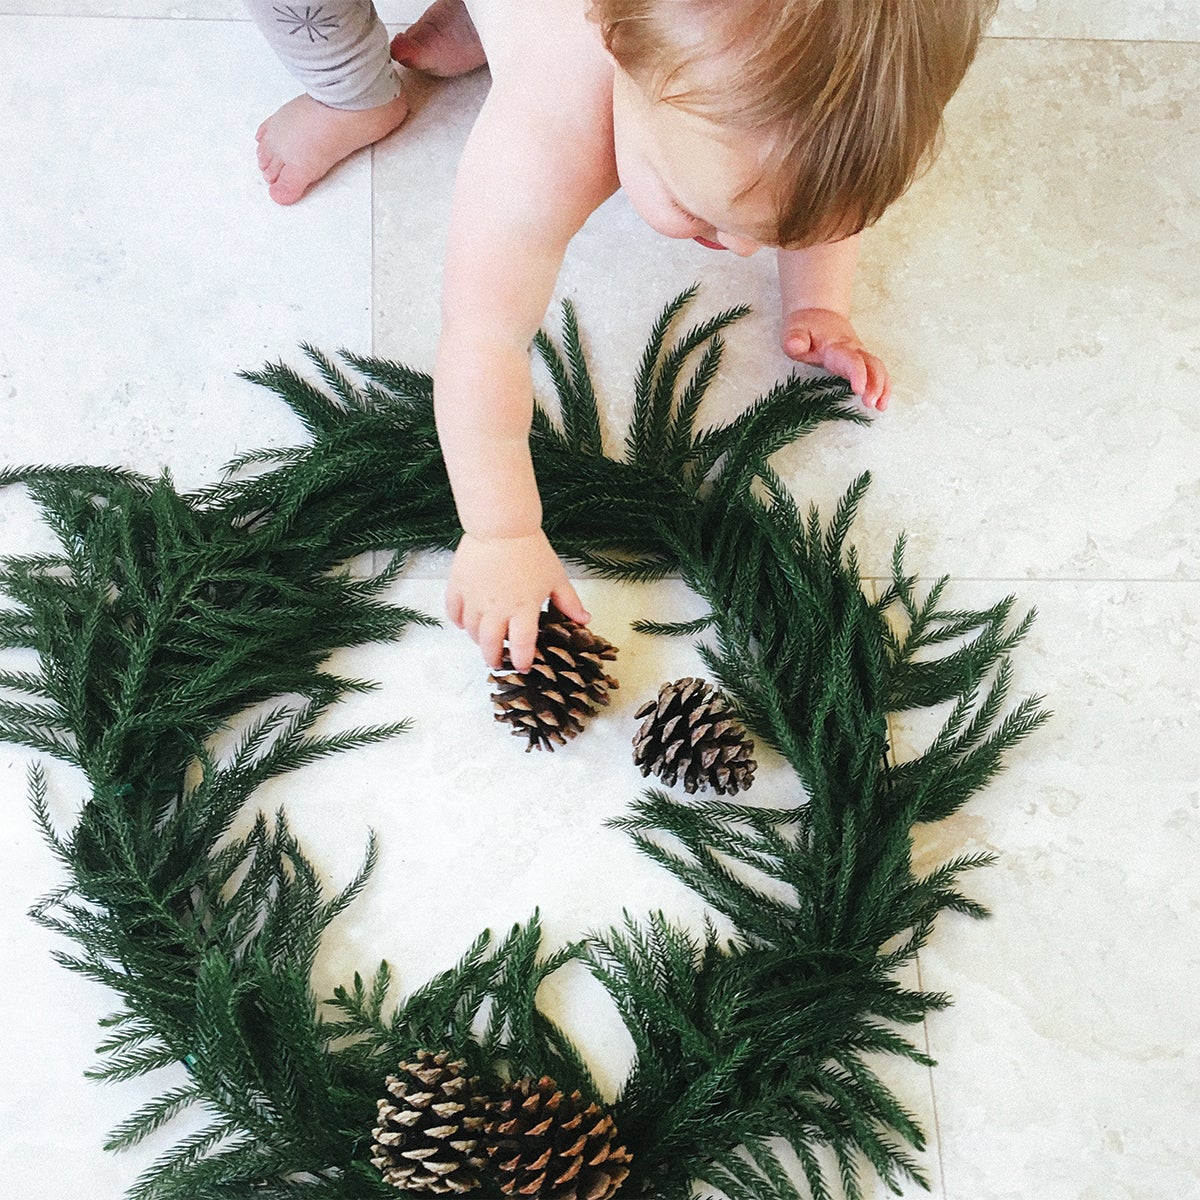 Toddler placing pinecone on homemade wreath